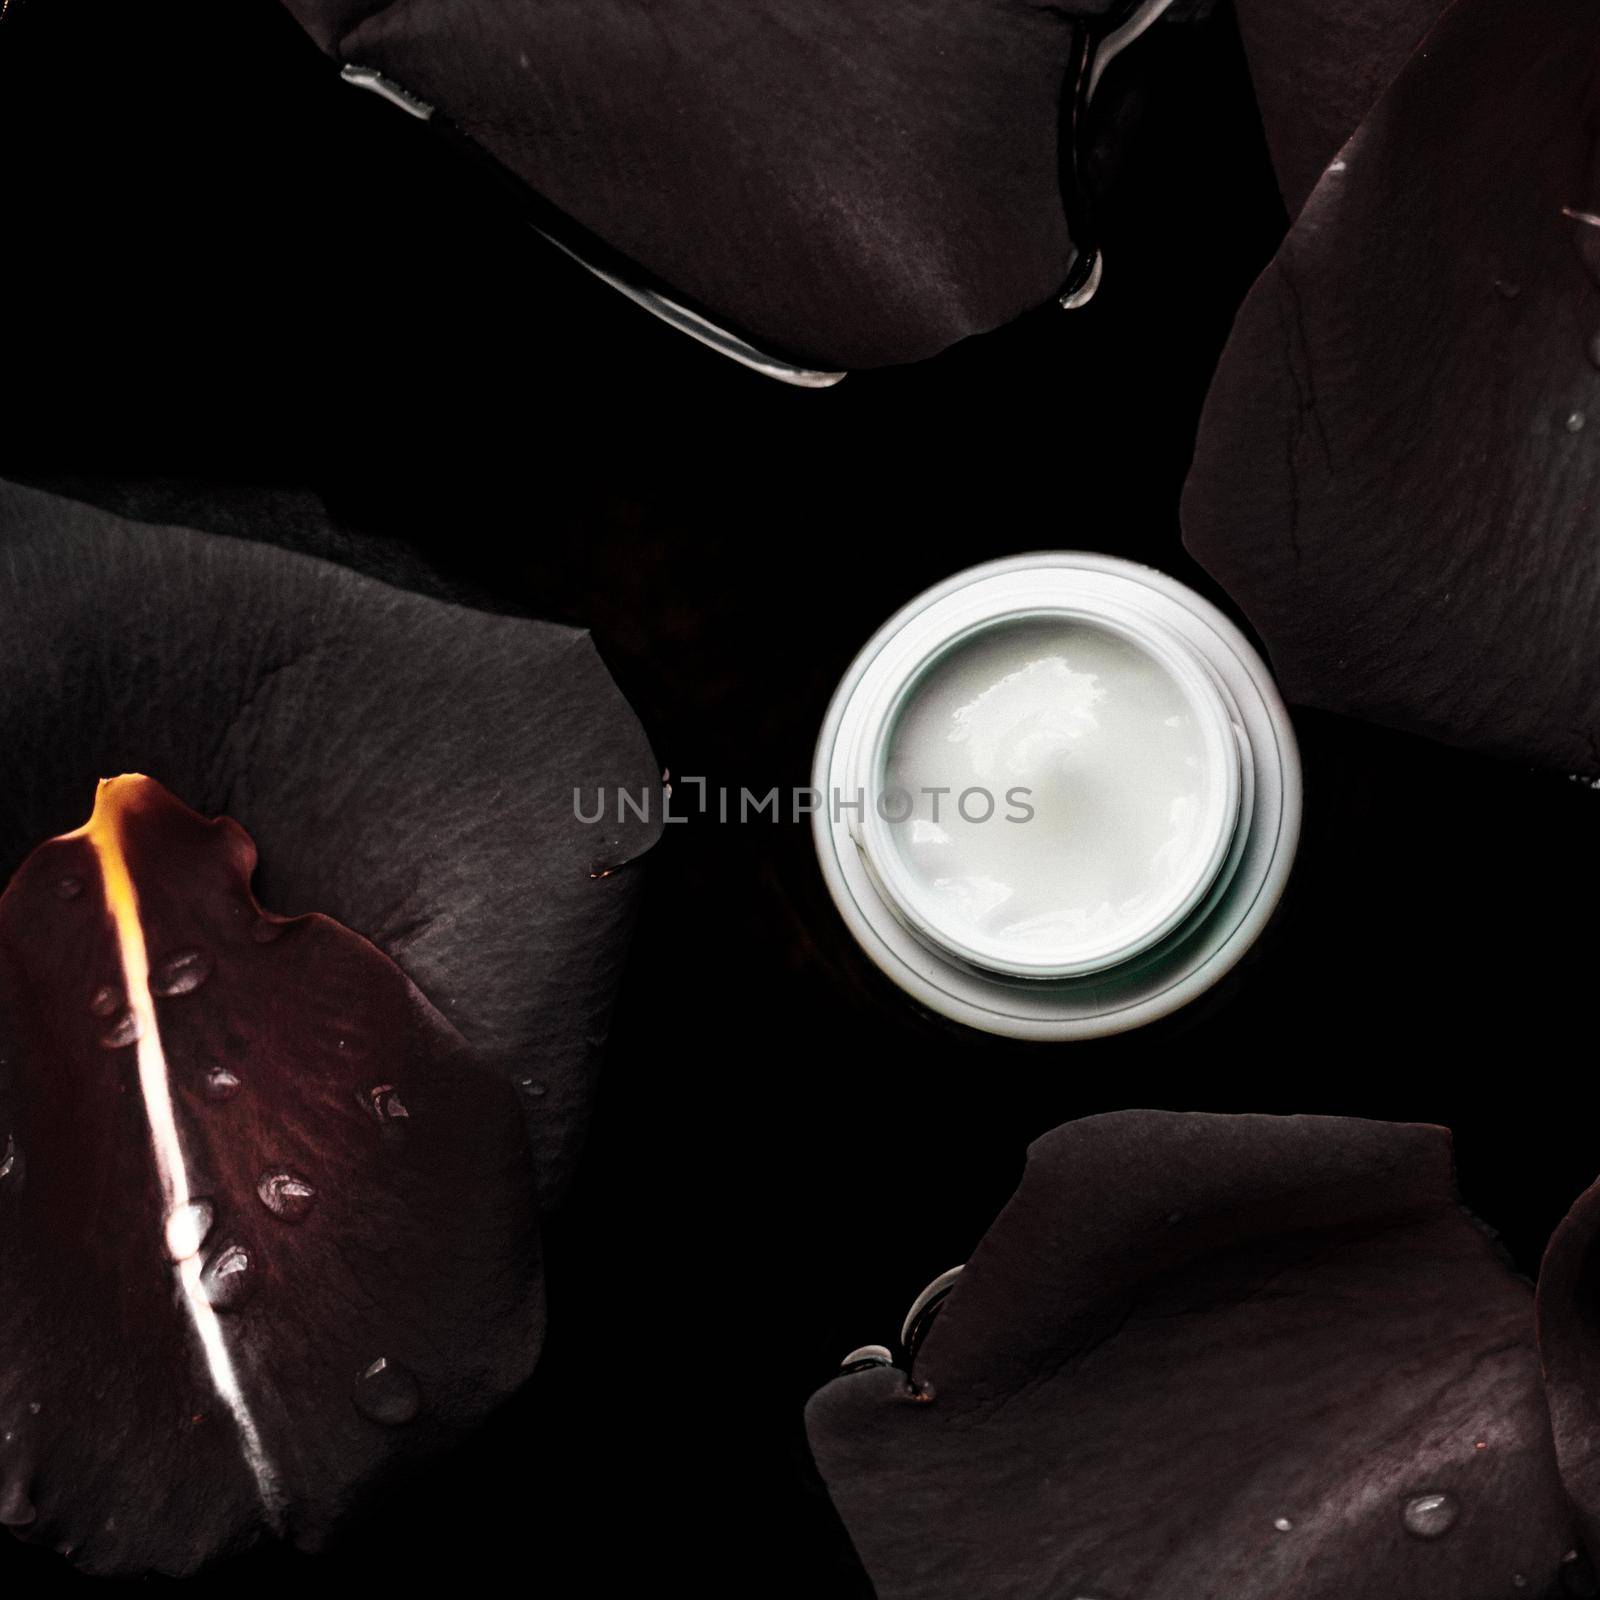 beauty cream jar and flower petals - cosmetics with flowers styled concept by Anneleven